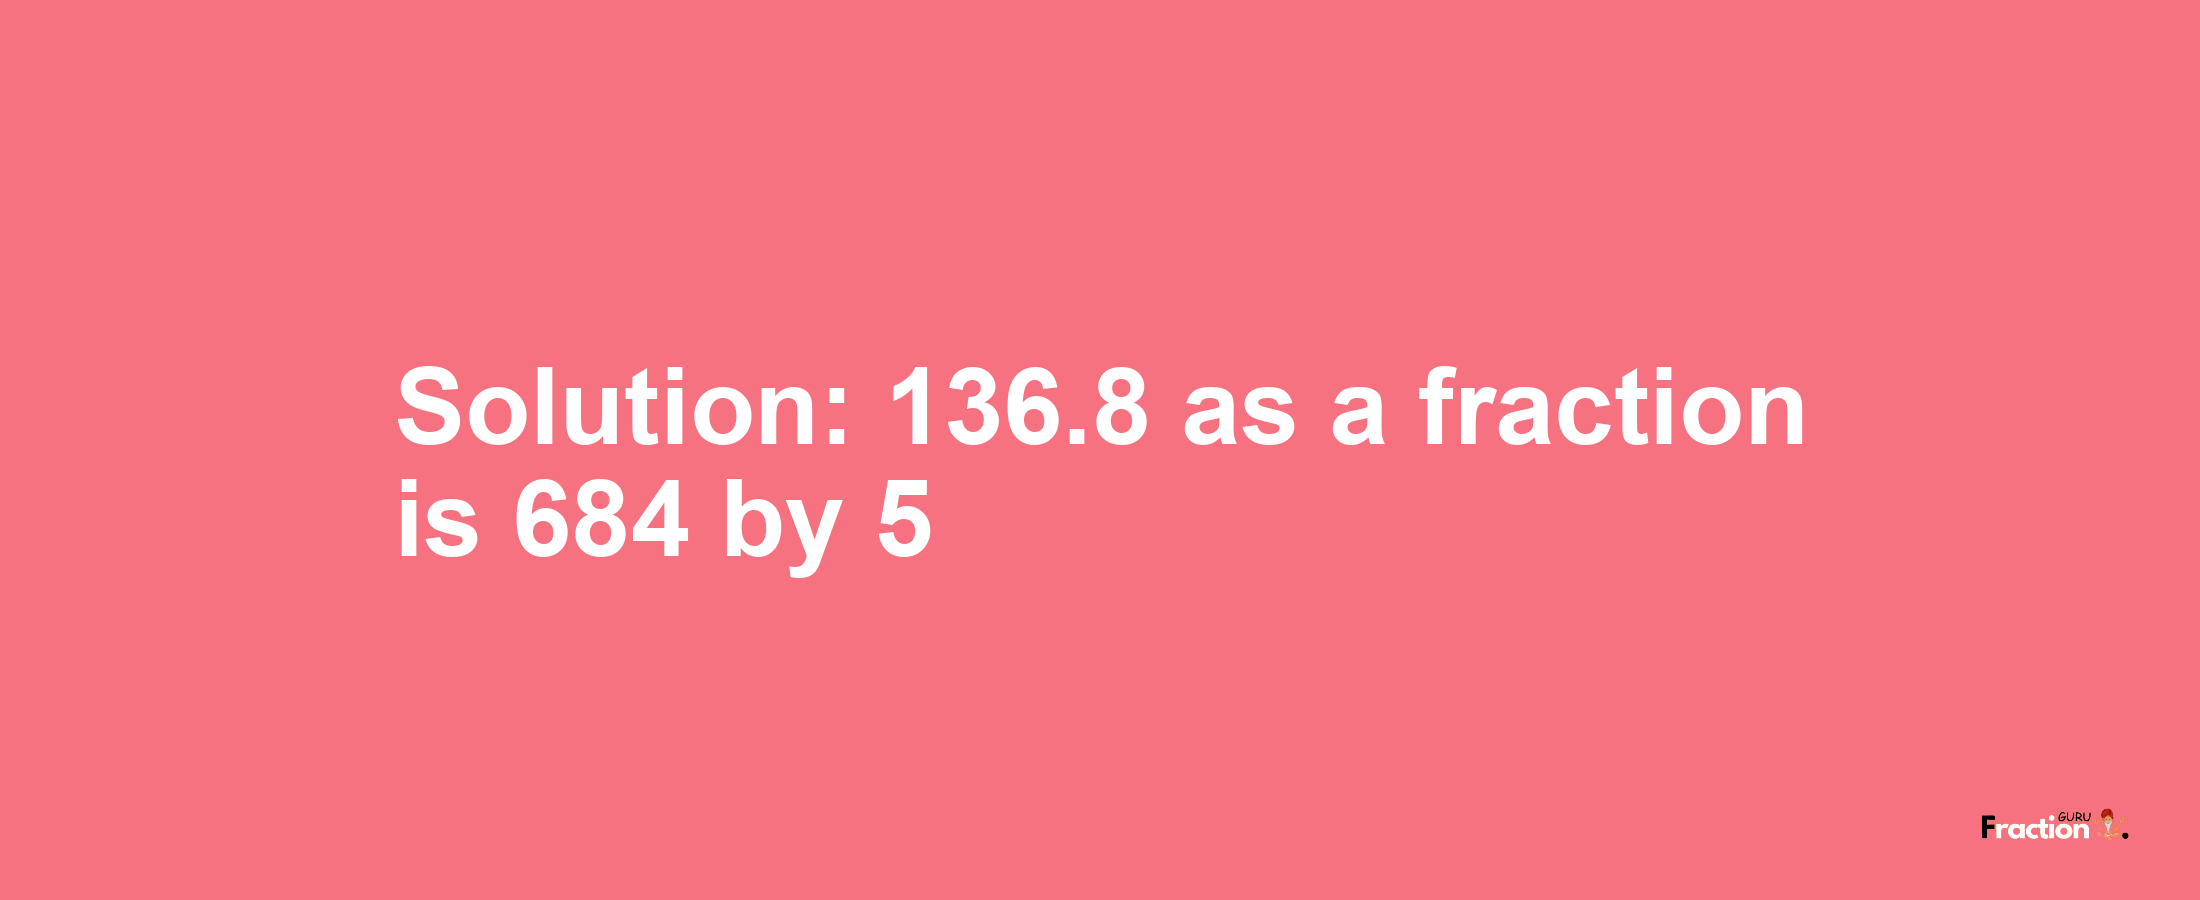 Solution:136.8 as a fraction is 684/5